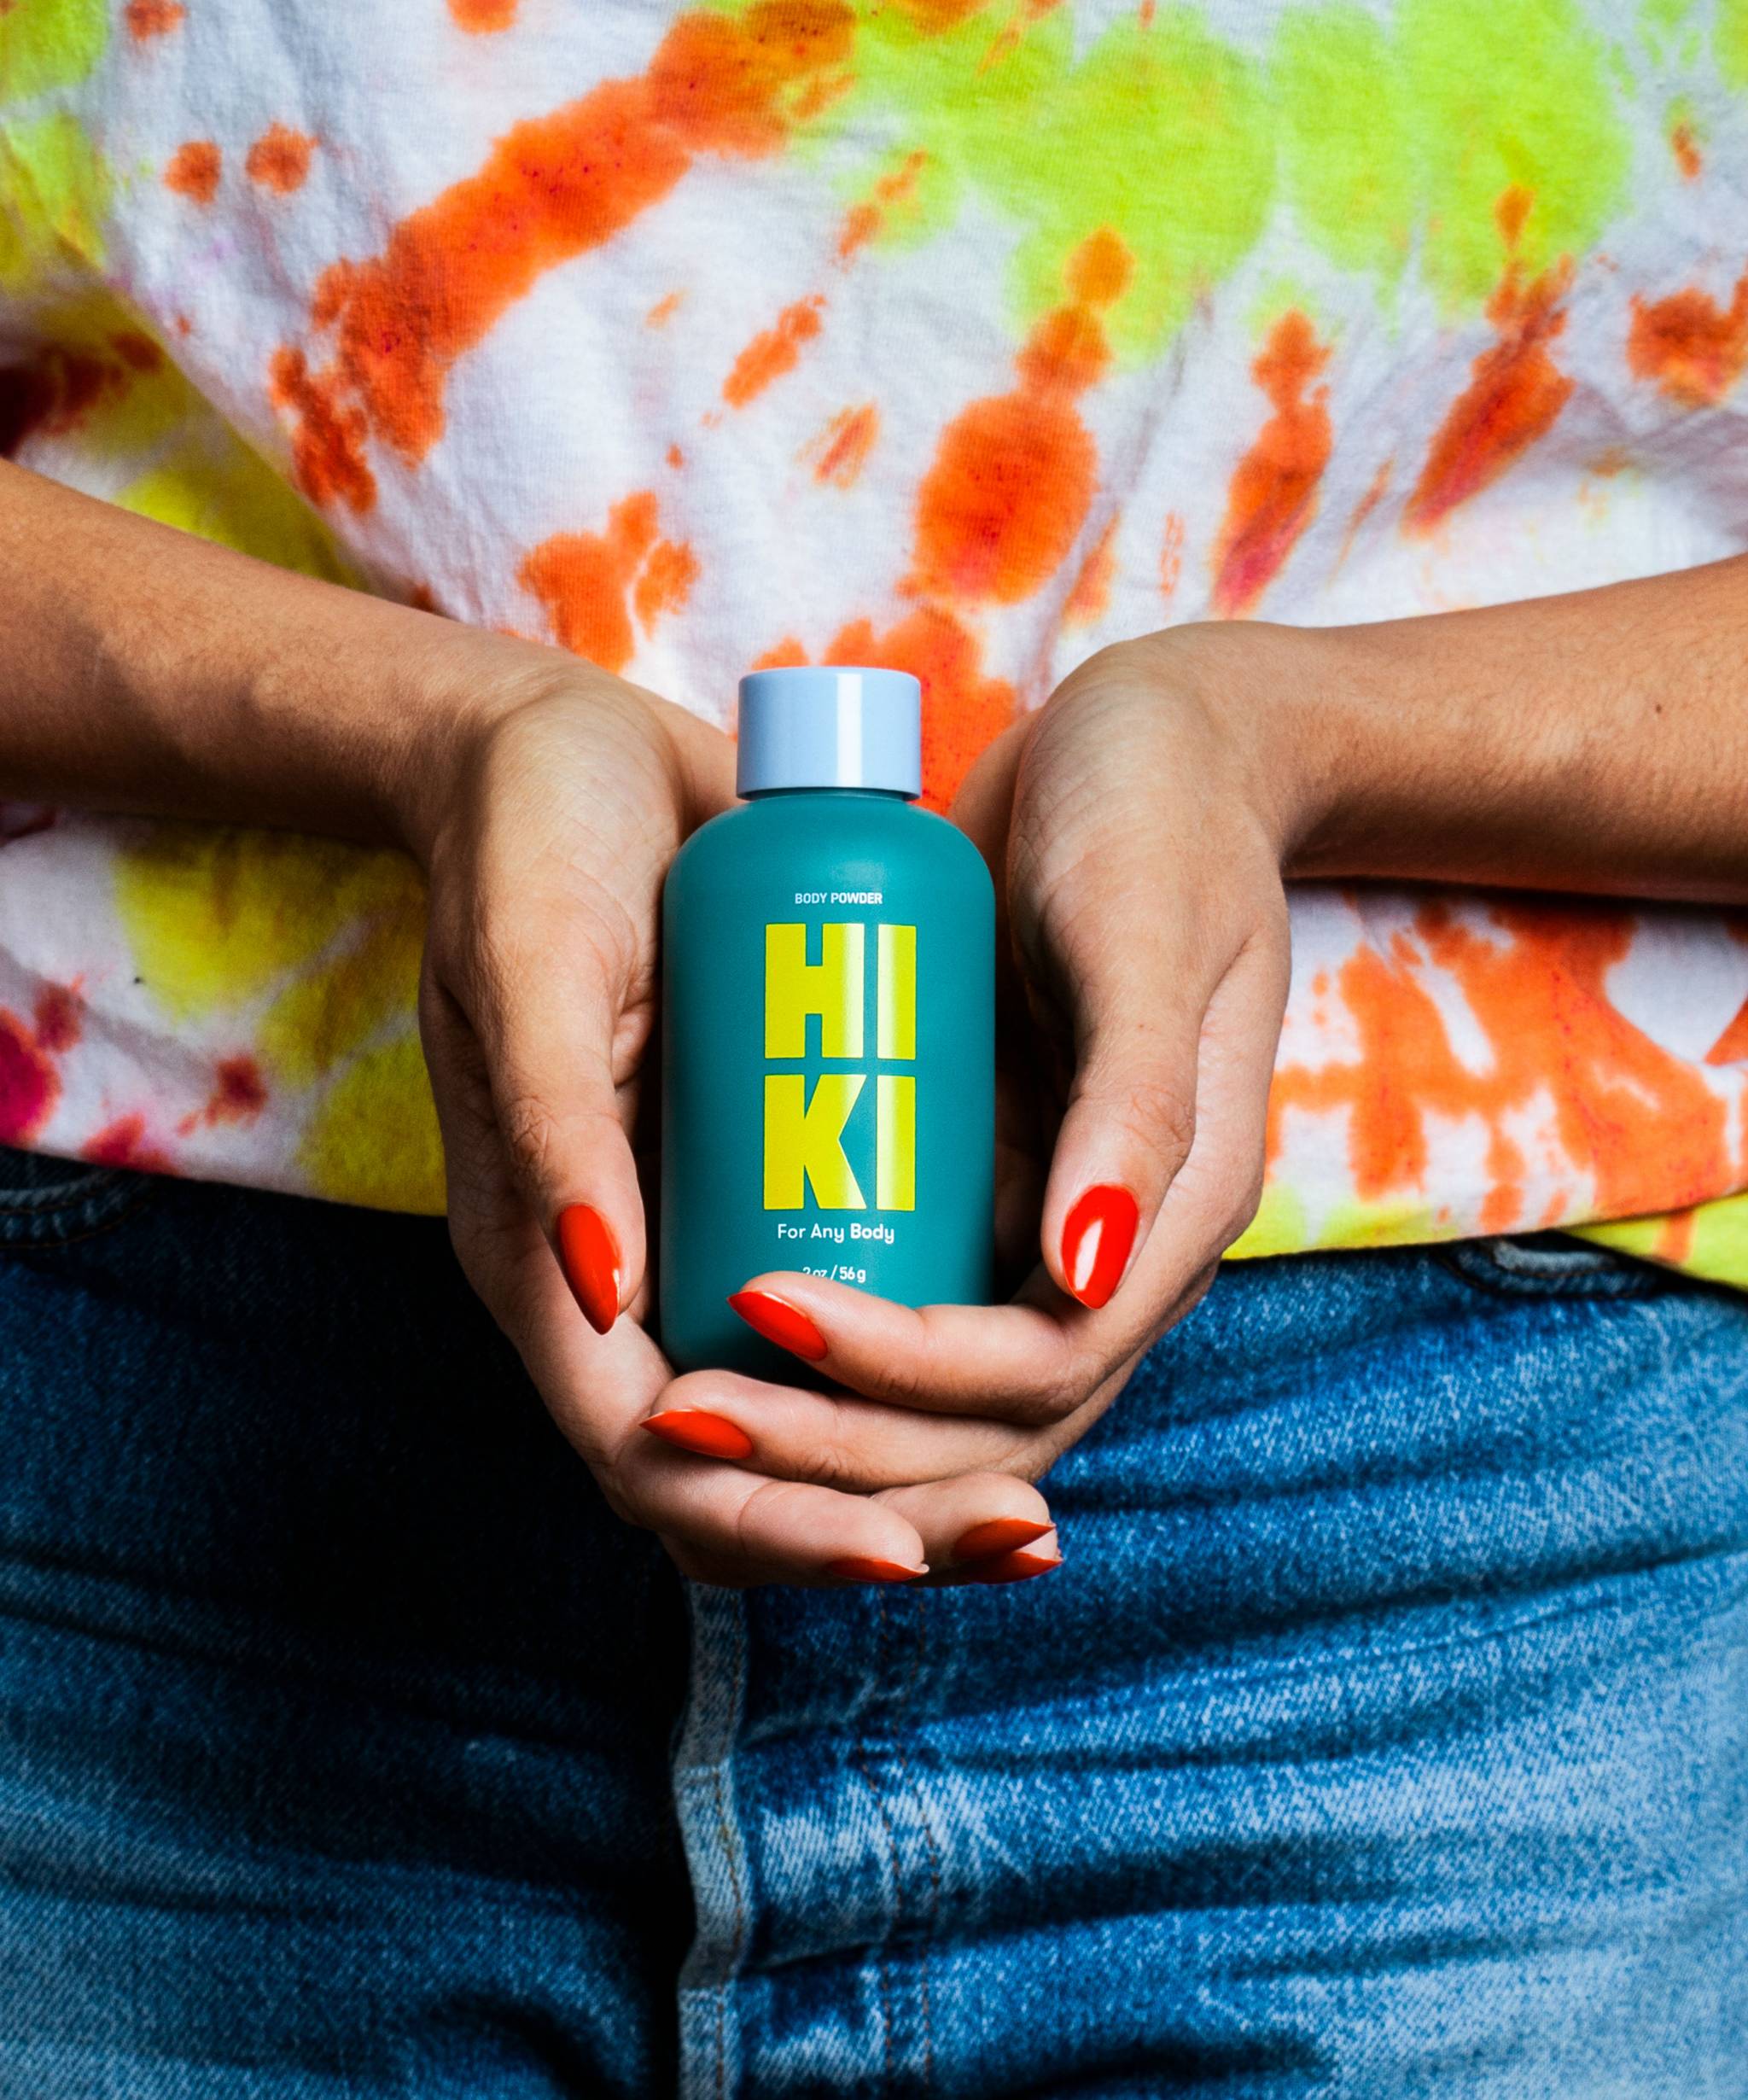 Hiki by Arfa: deodorant for values-first buyers